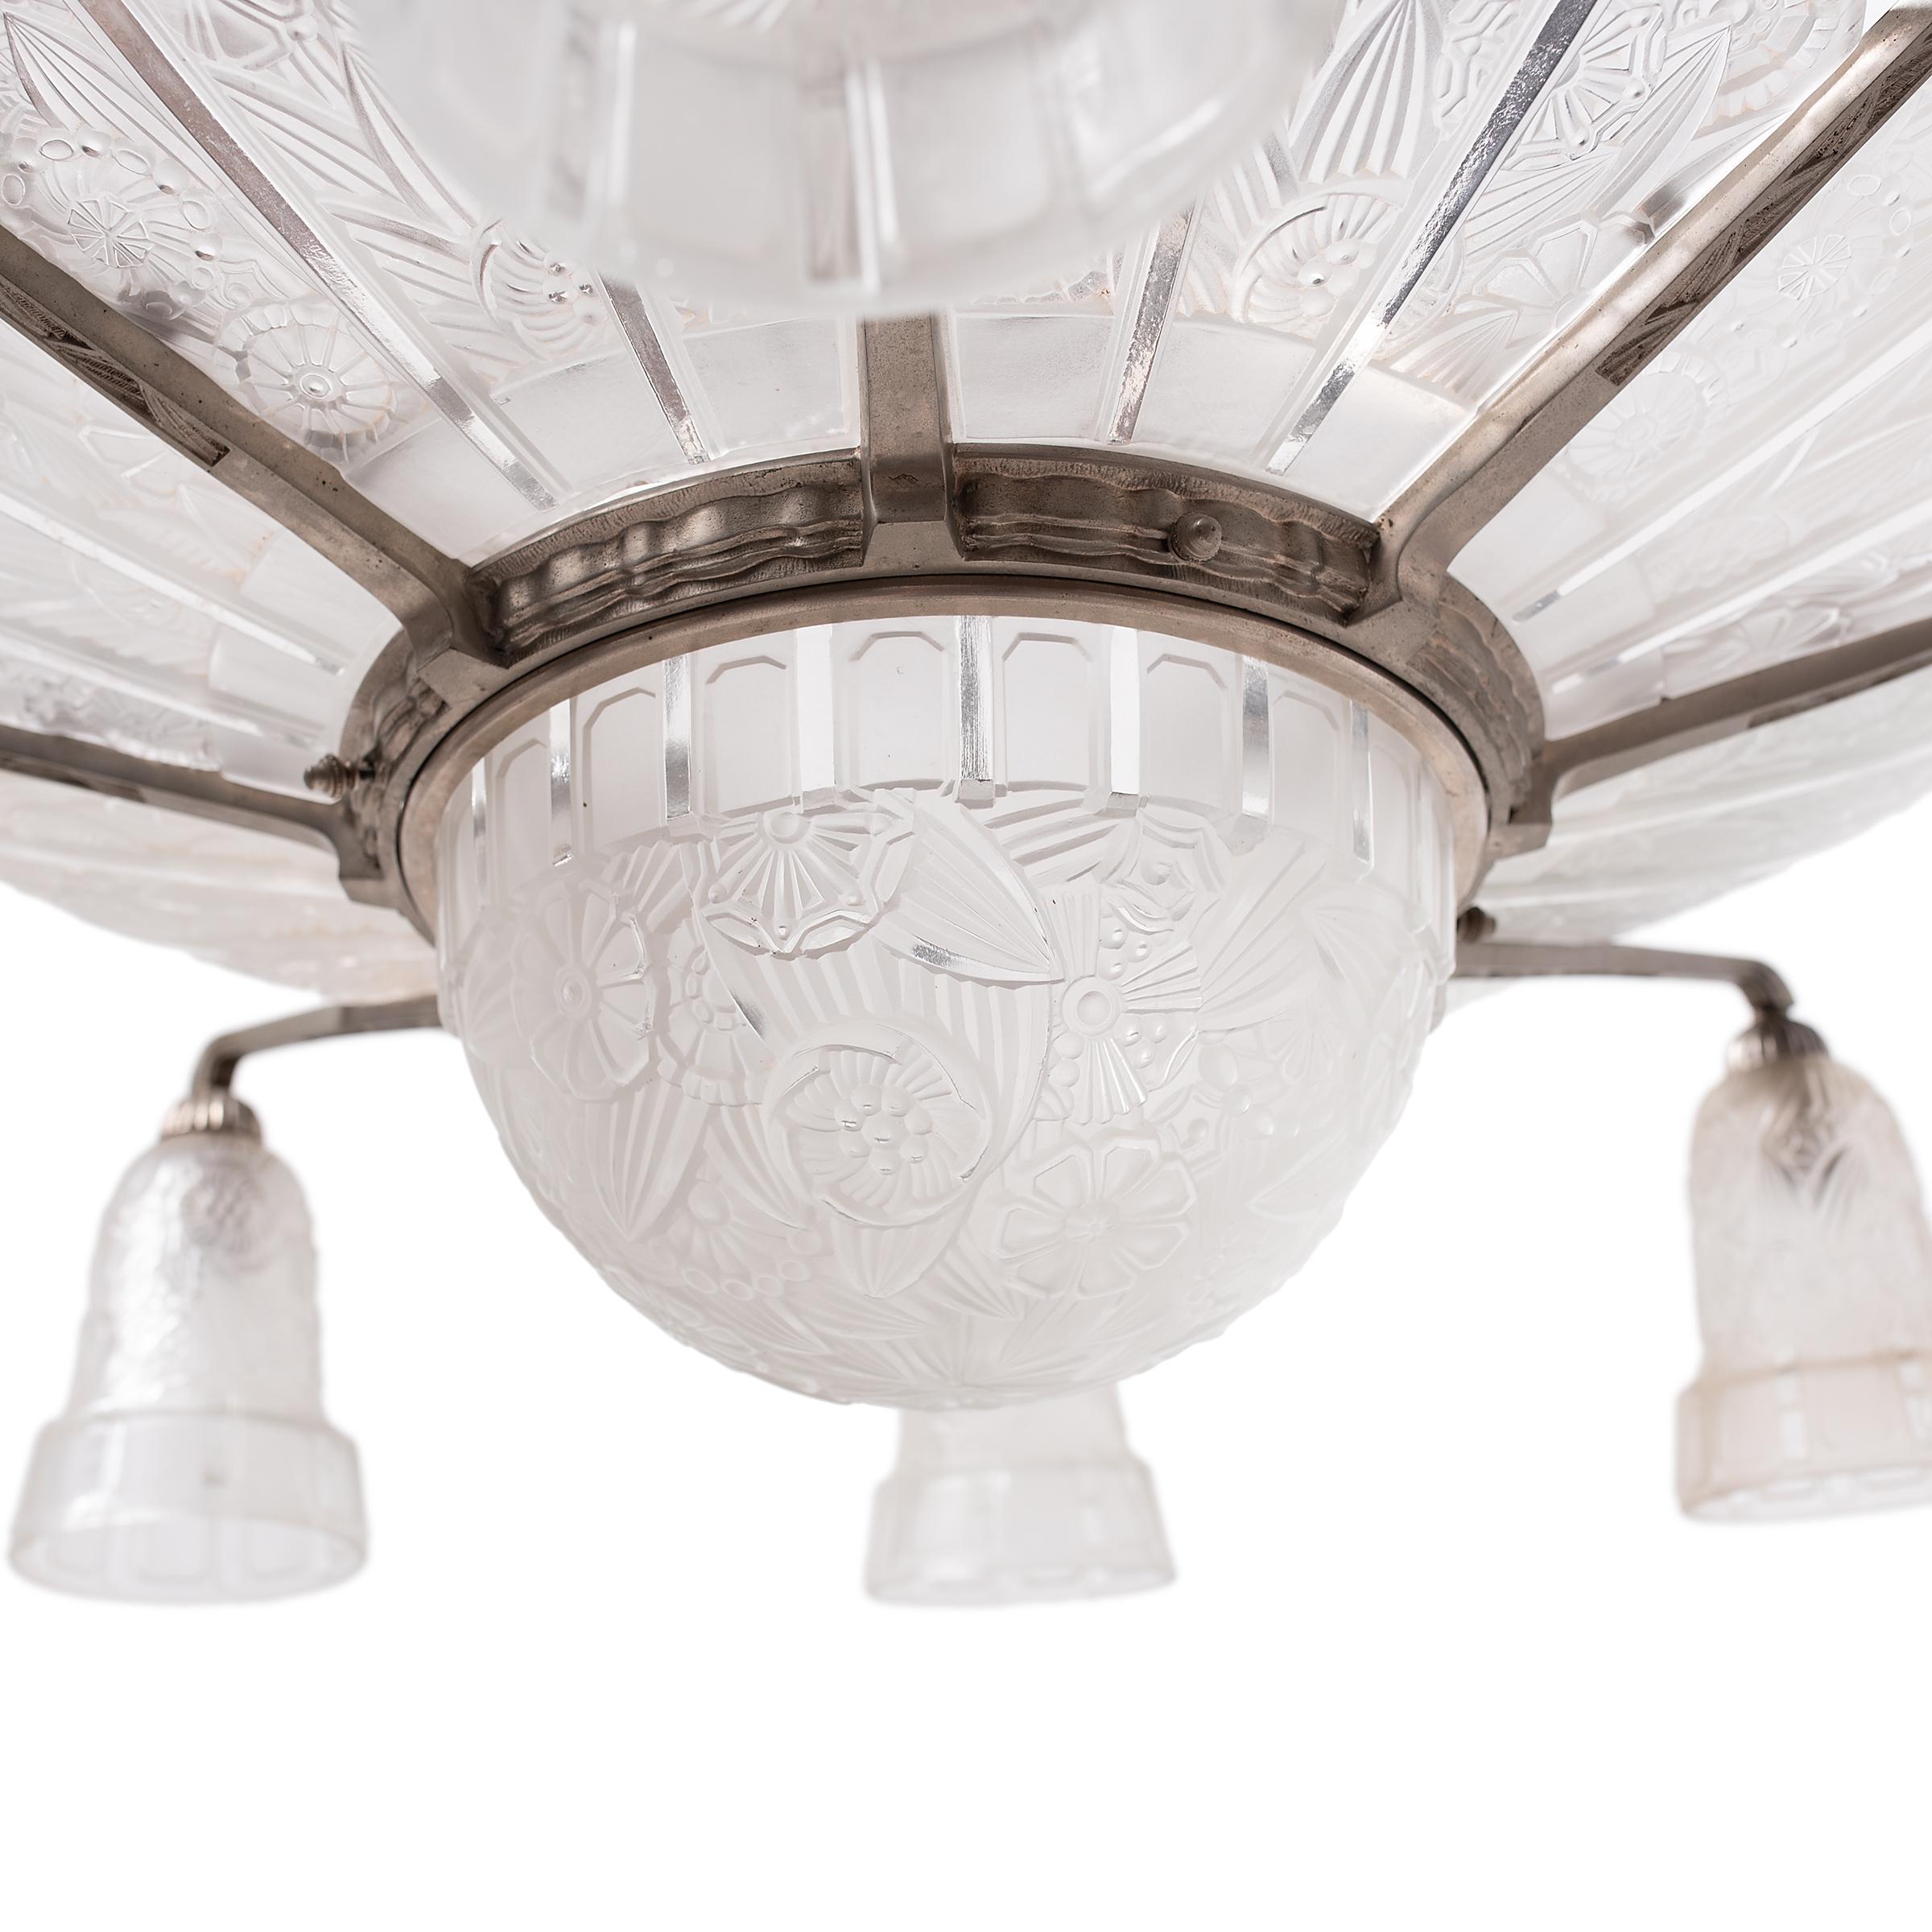 Mid-20th Century French Deco Chandelier Signed by Hettier & Vincent, c. 1930 For Sale